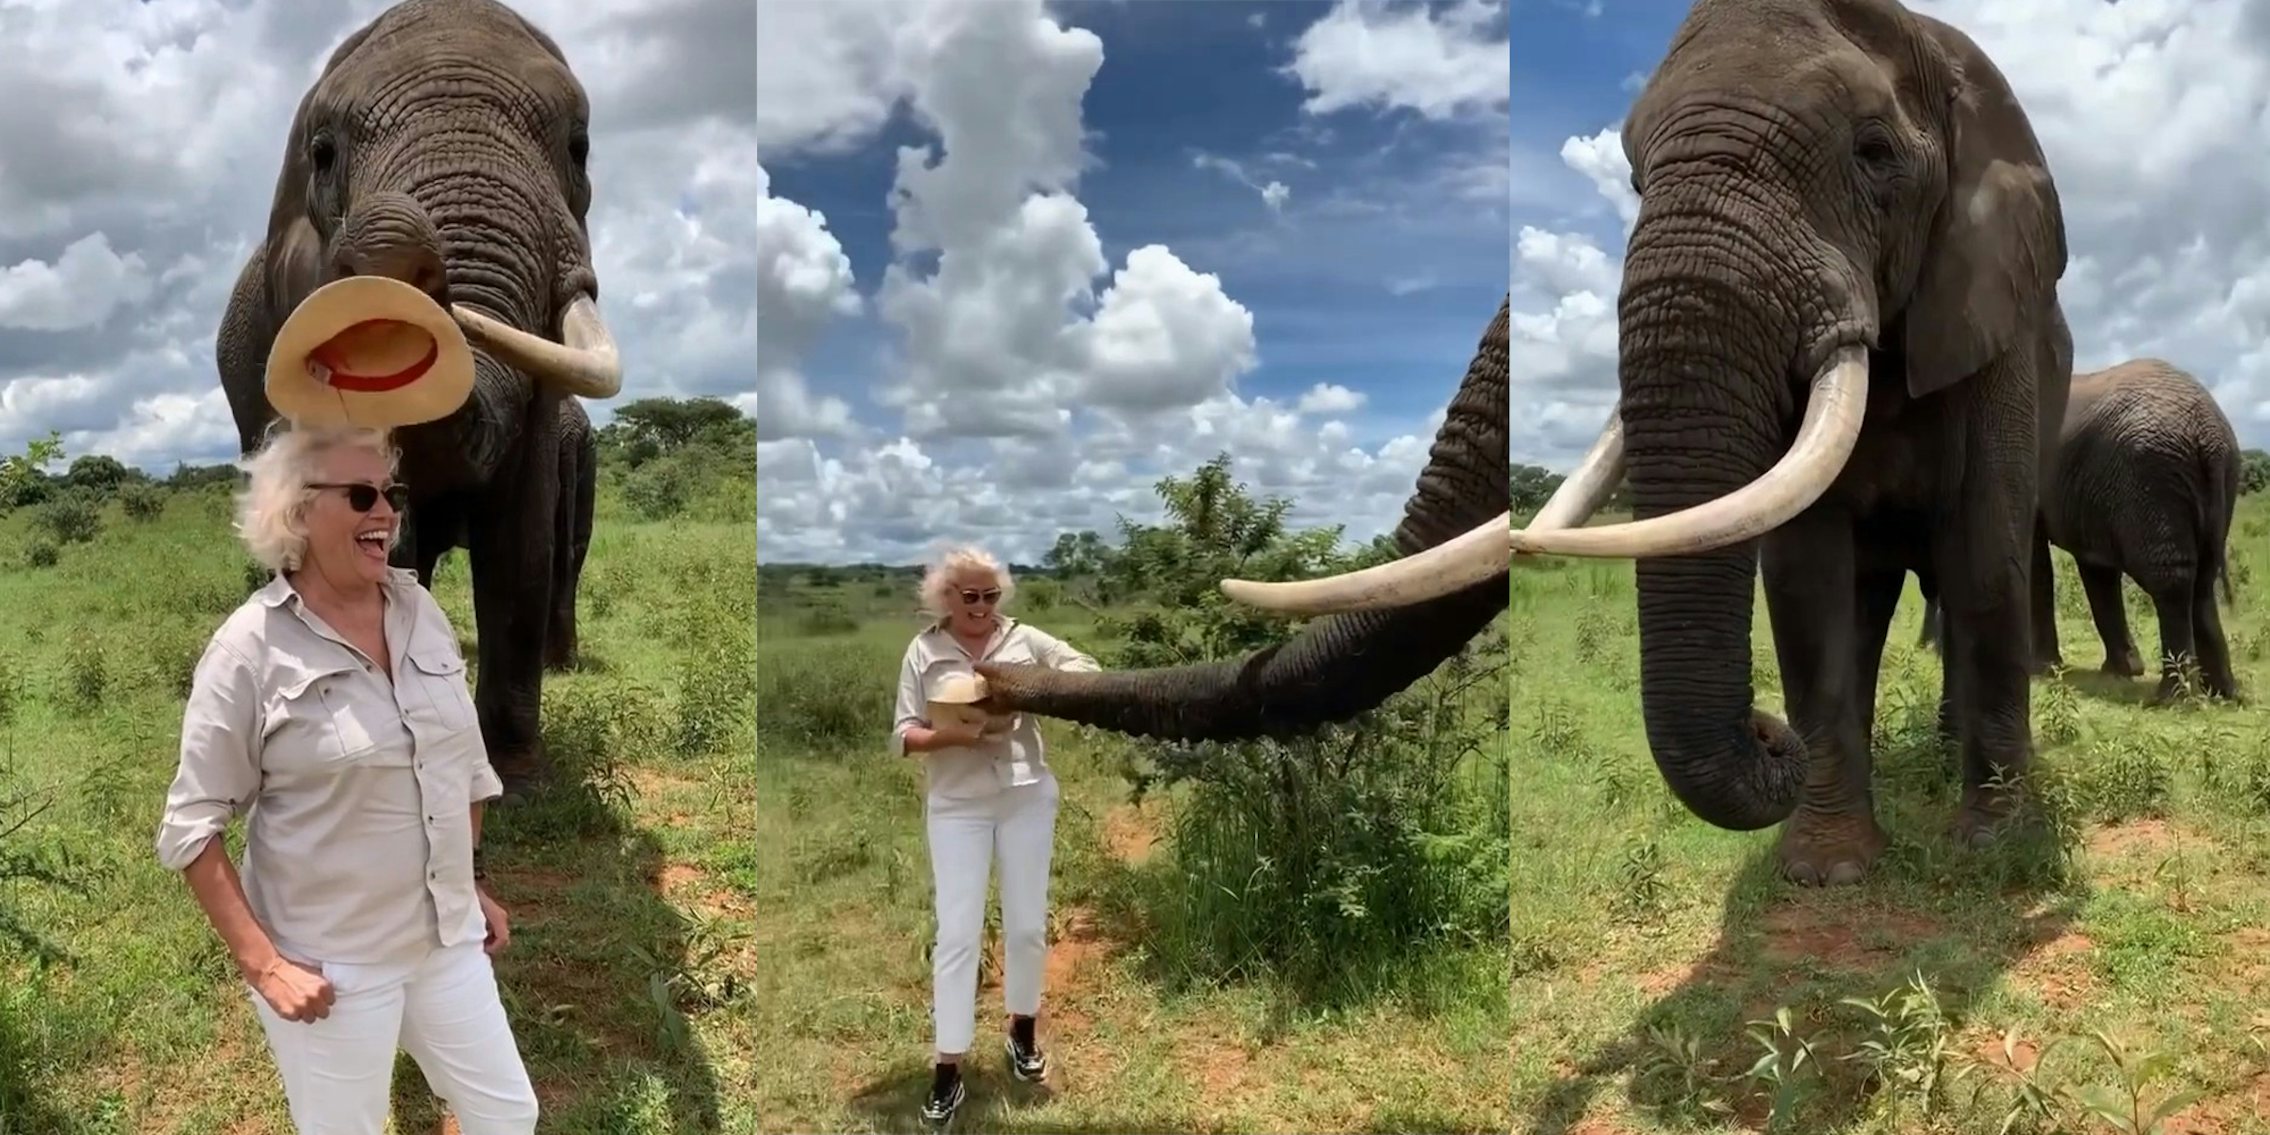 Elephant pretends to steal woman's hat before giving it back.